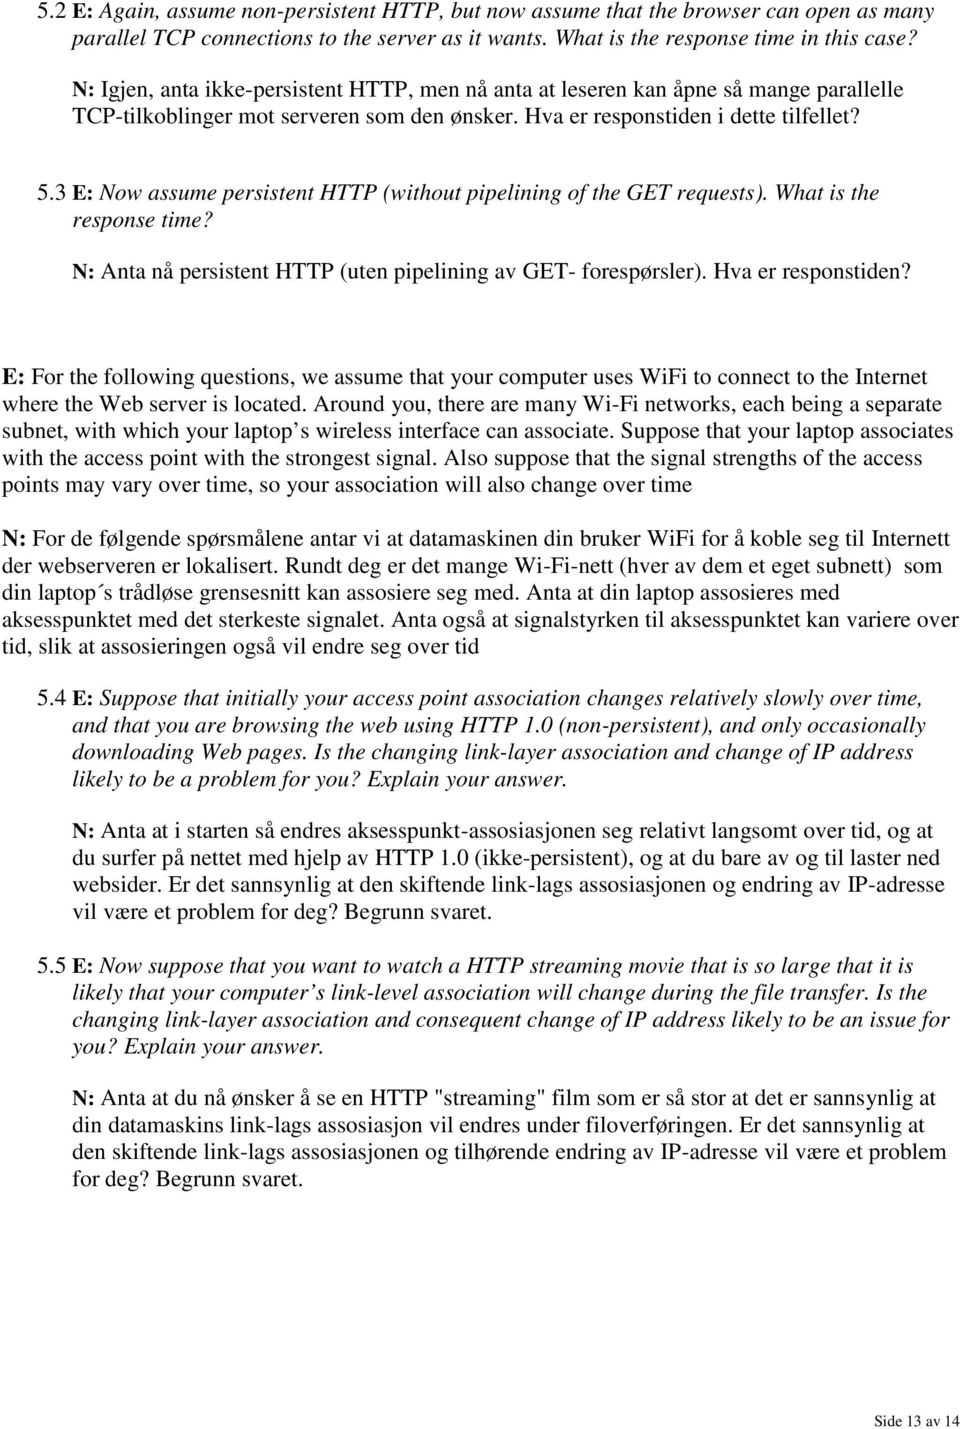 3 E: Now assume persistent HTTP (without pipelining of the GET requests). What is the response time? N: Anta nå persistent HTTP (uten pipelining av GET- forespørsler). Hva er responstiden?